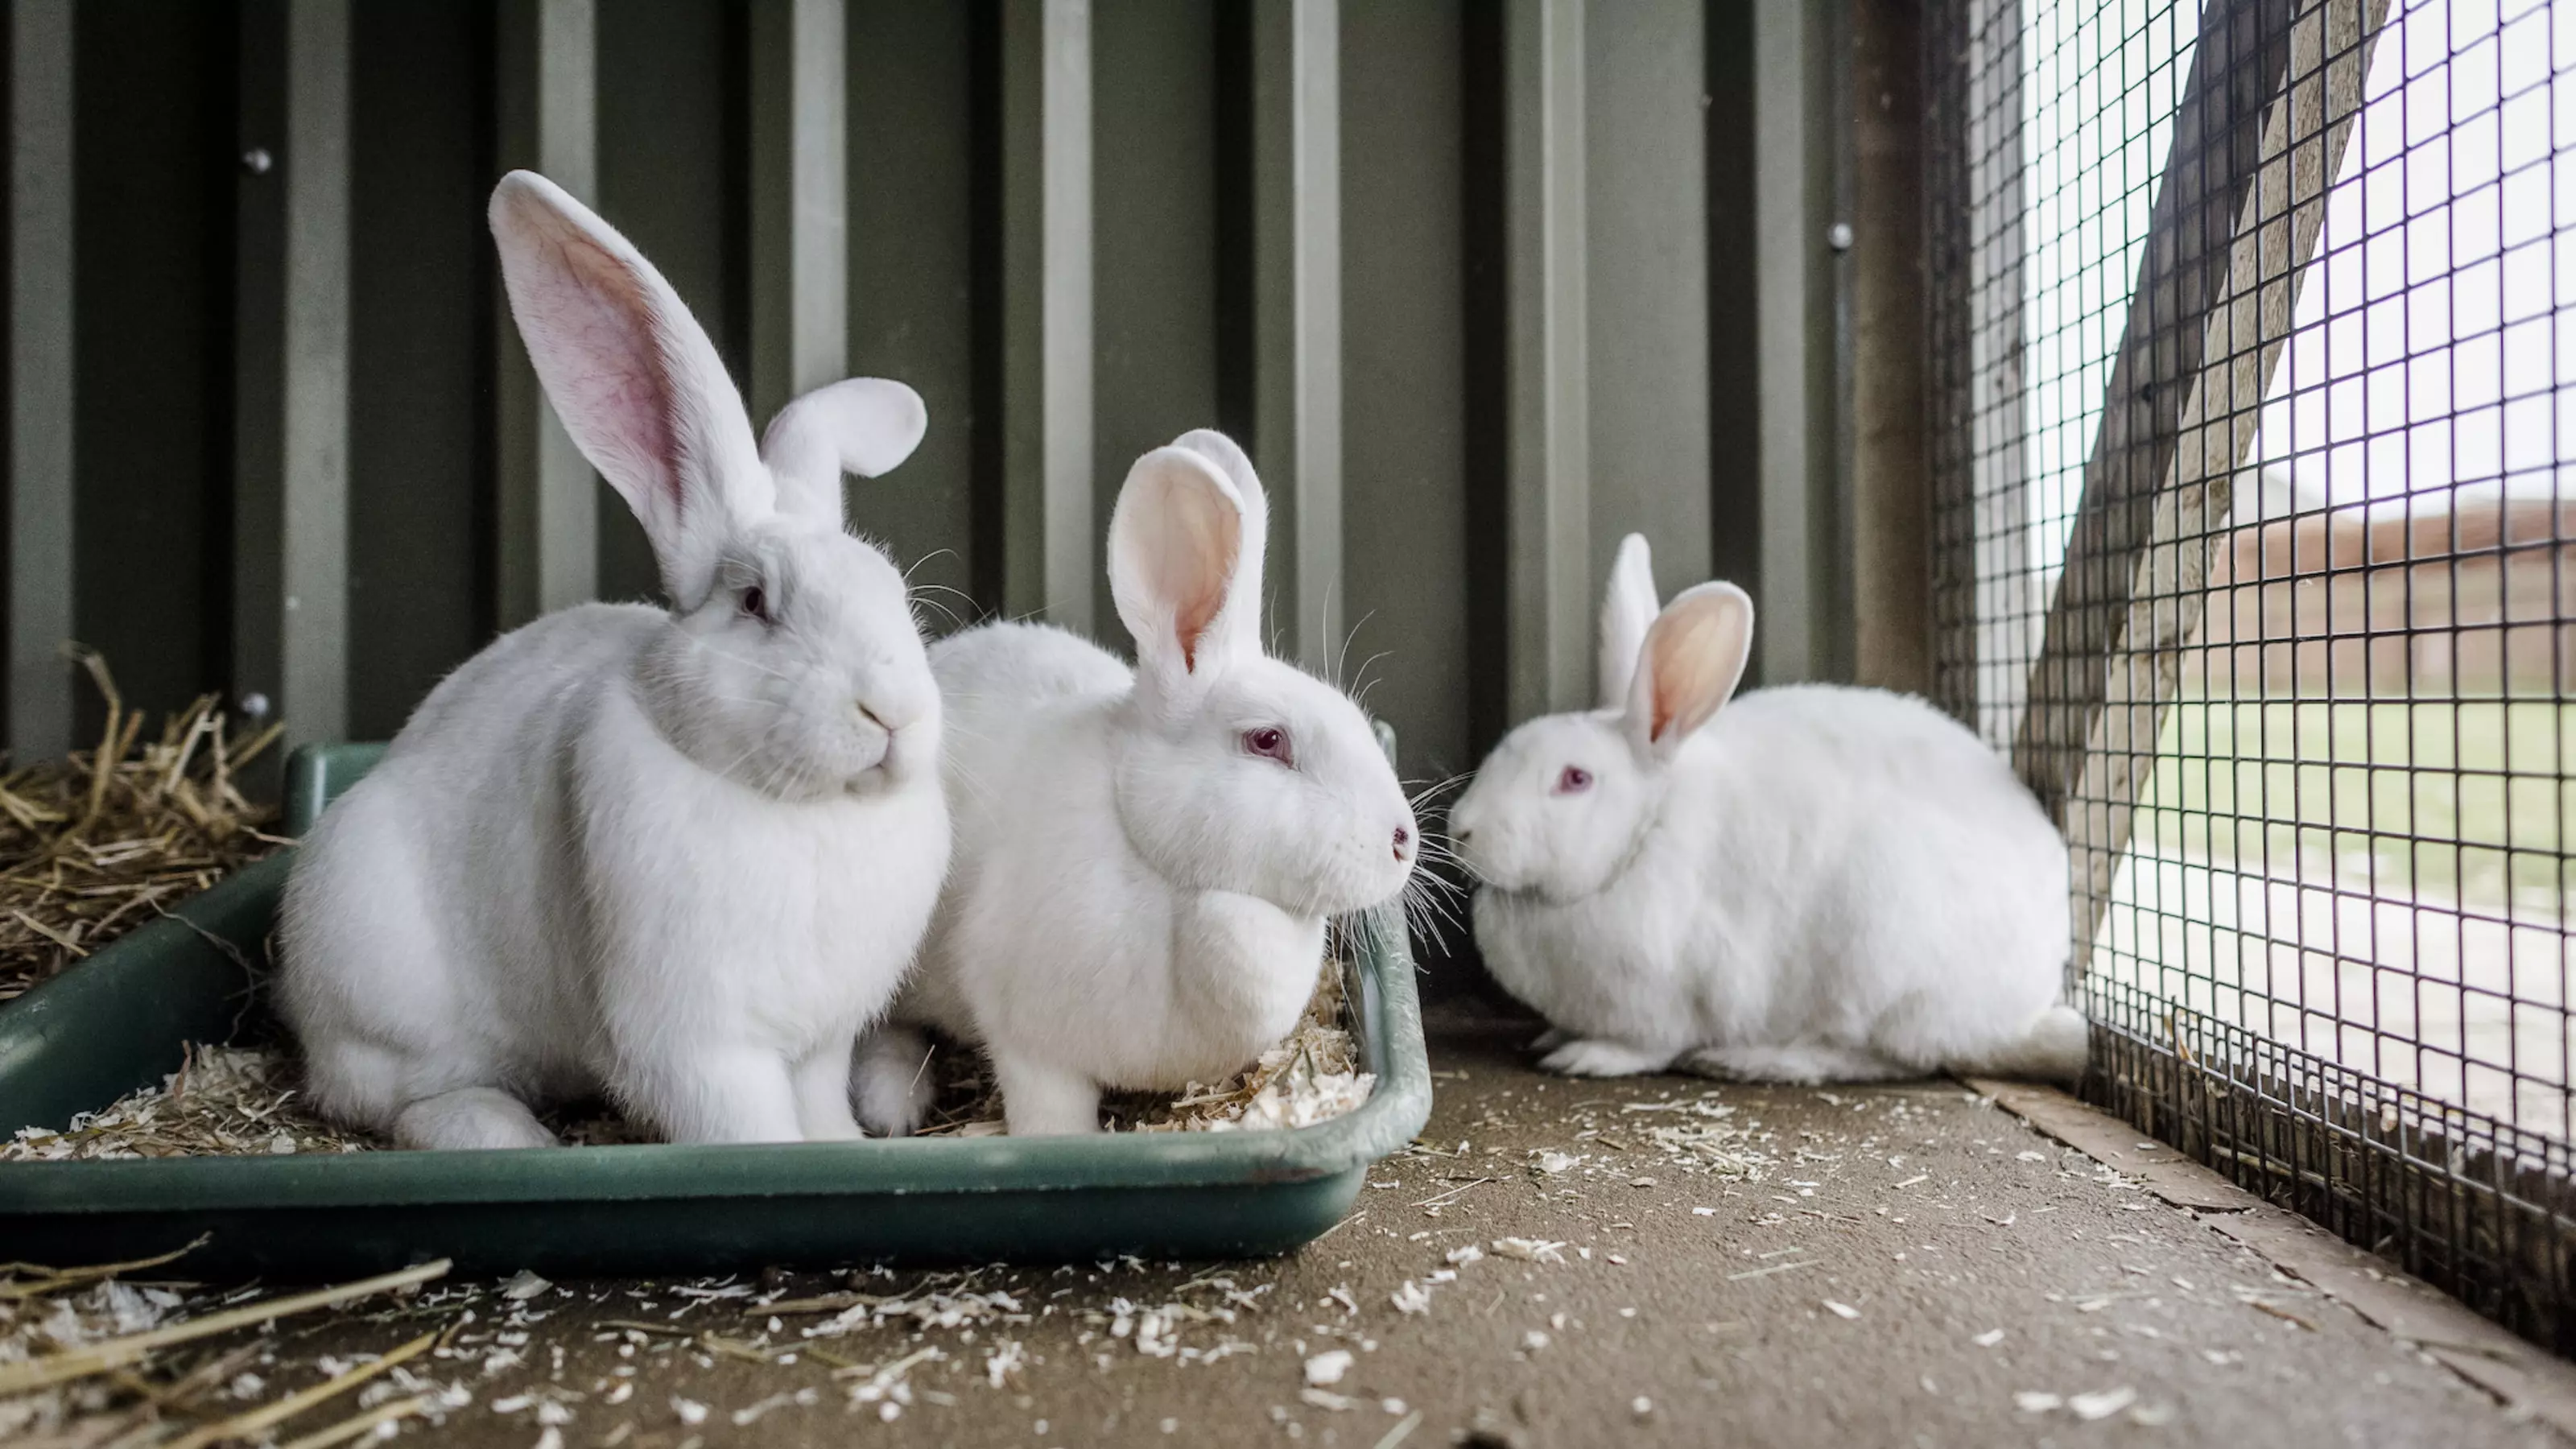 Rabbits Ebenezer, Belle and Fezziwig at Burford rehoming centre